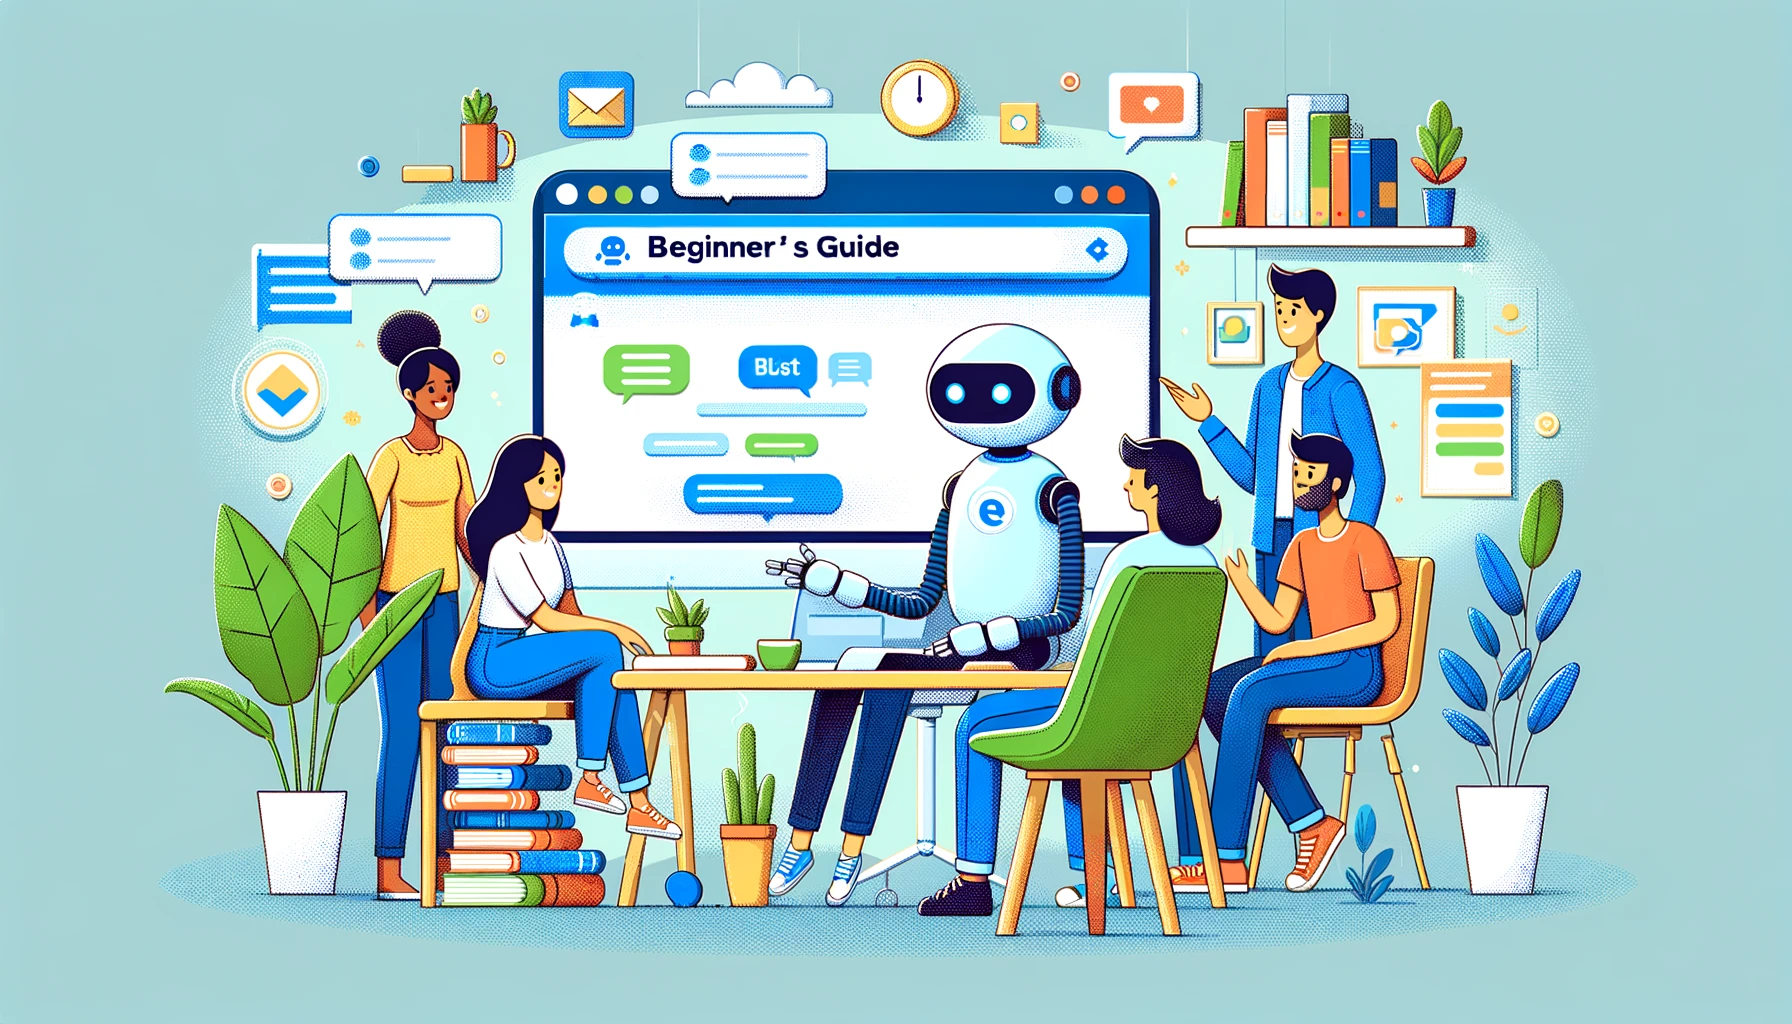 A digital illustration showing a friendly robot assisting a diverse group of people at a computer screen with the ChatGPT interface.